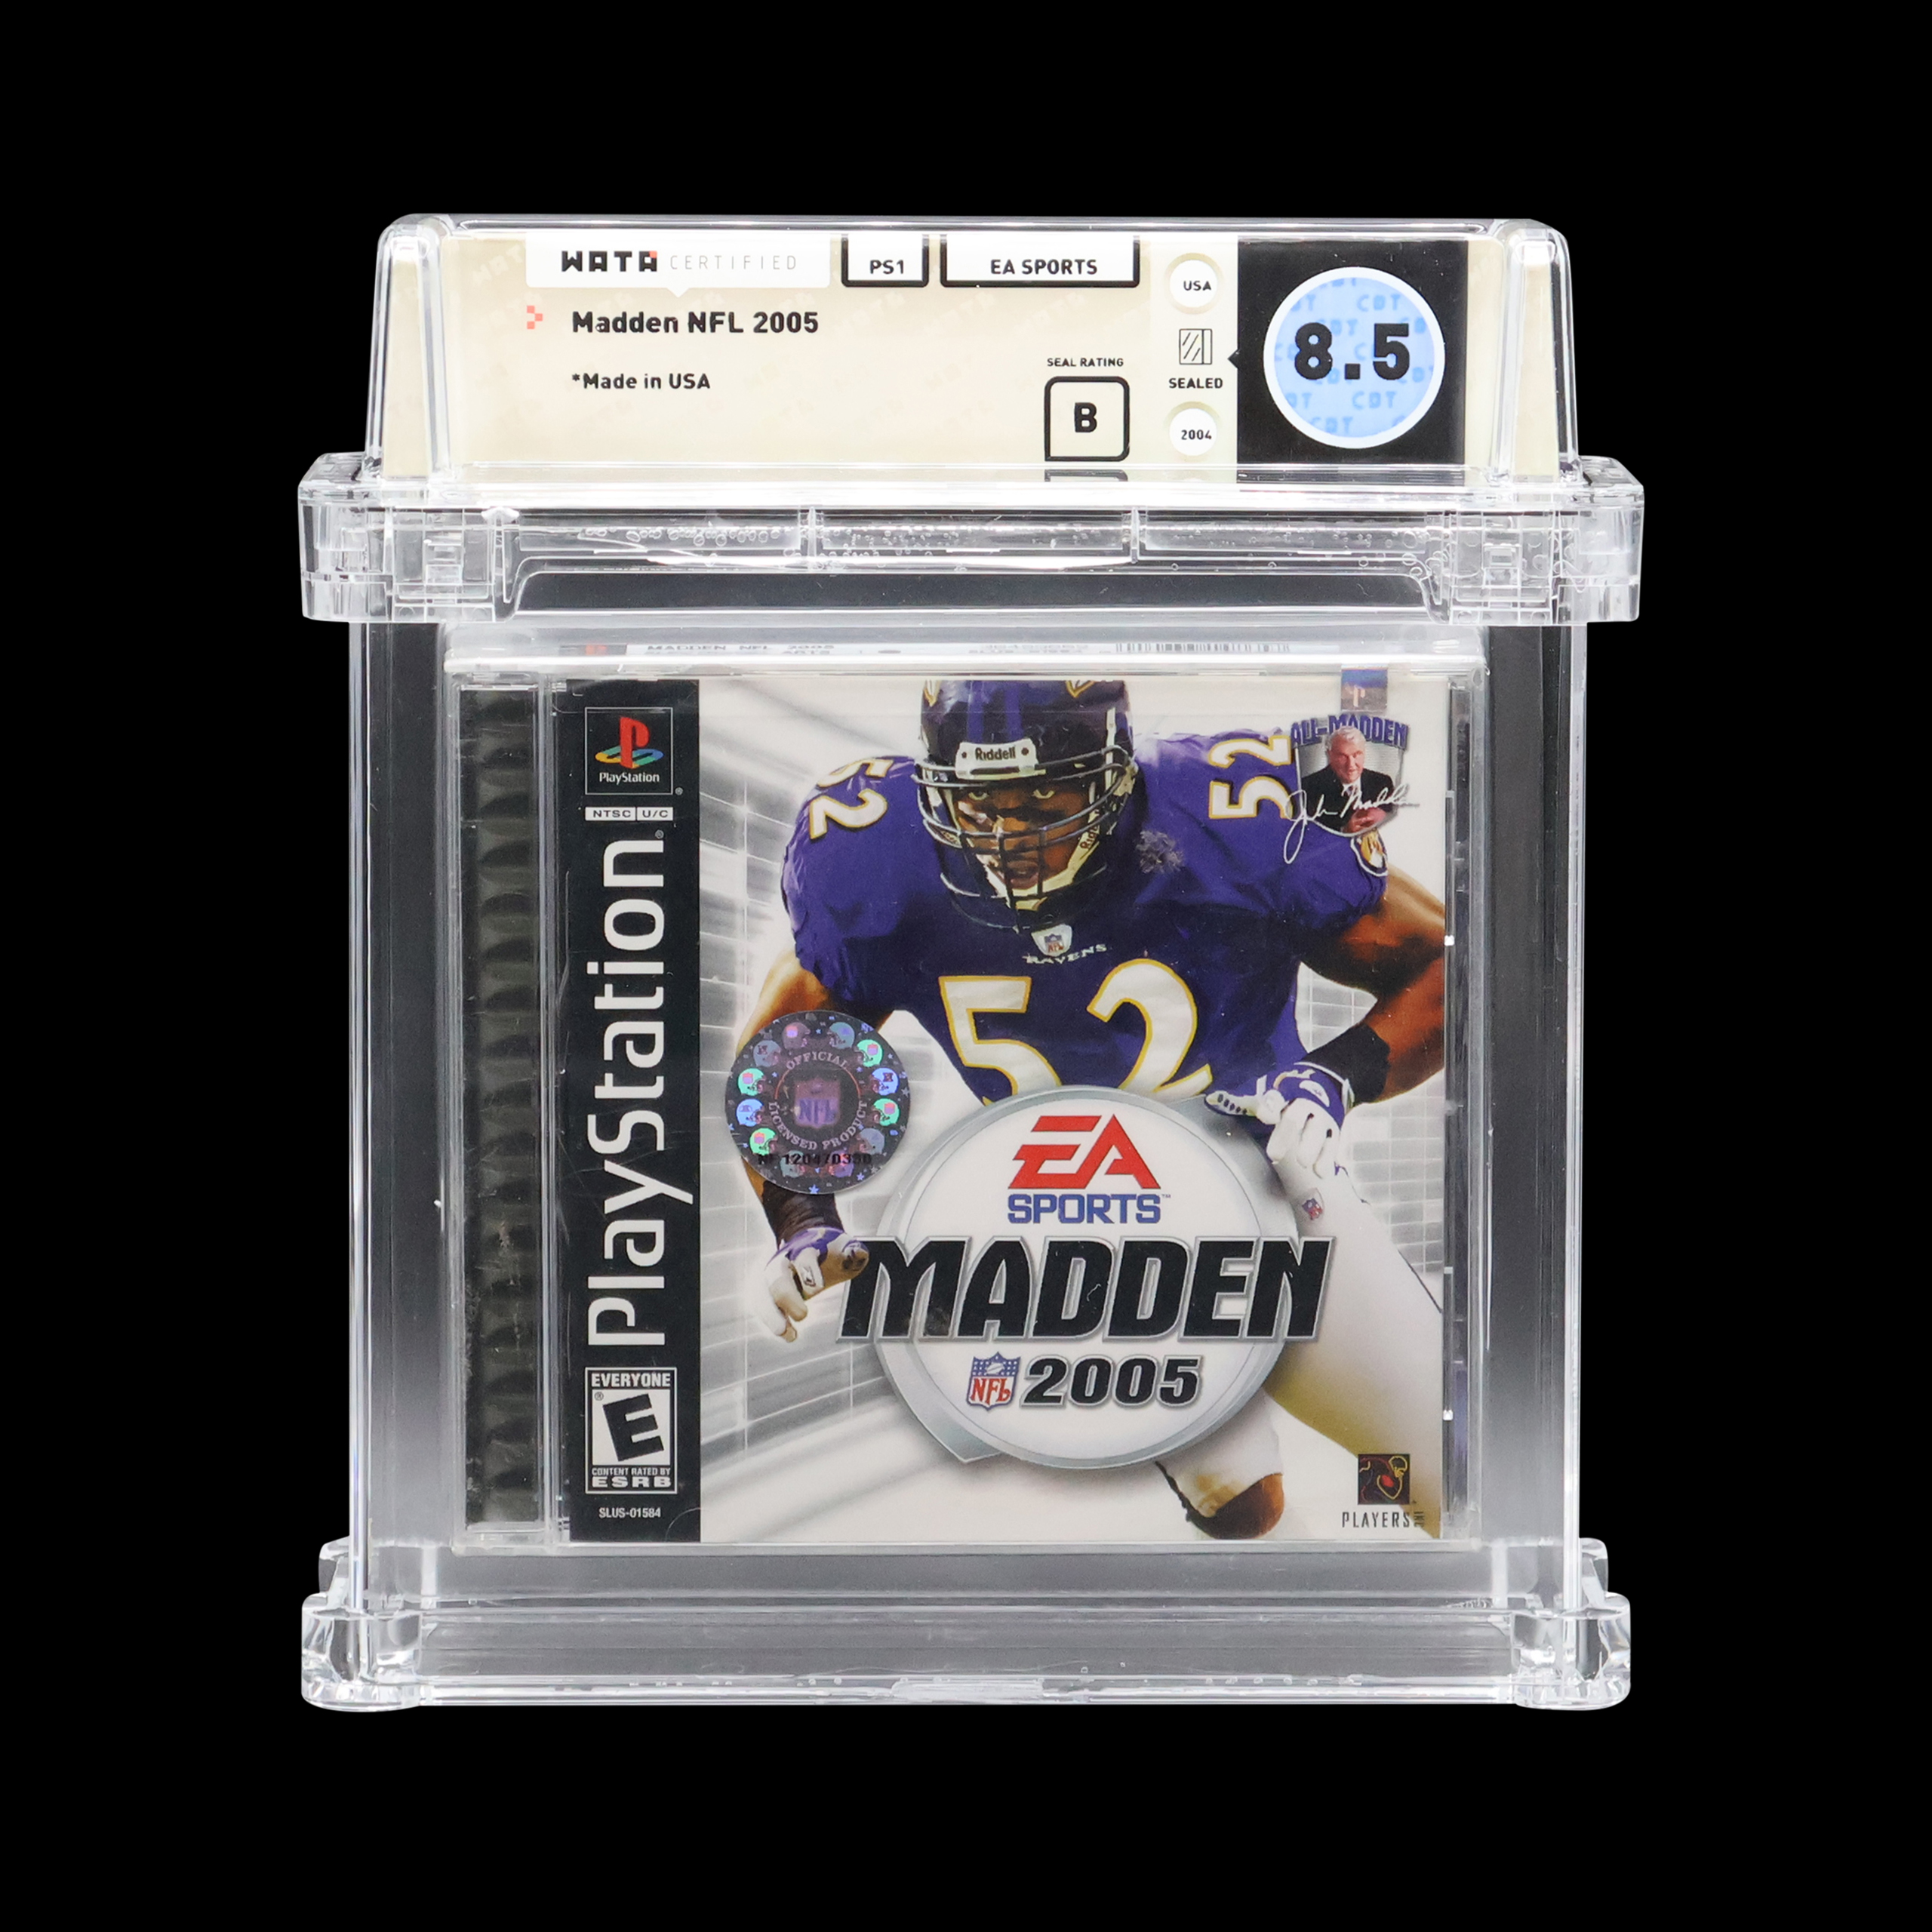 Madden NFL 2005 PlayStation 2 game, graded 8.5 by WATA, sealed in protective case.